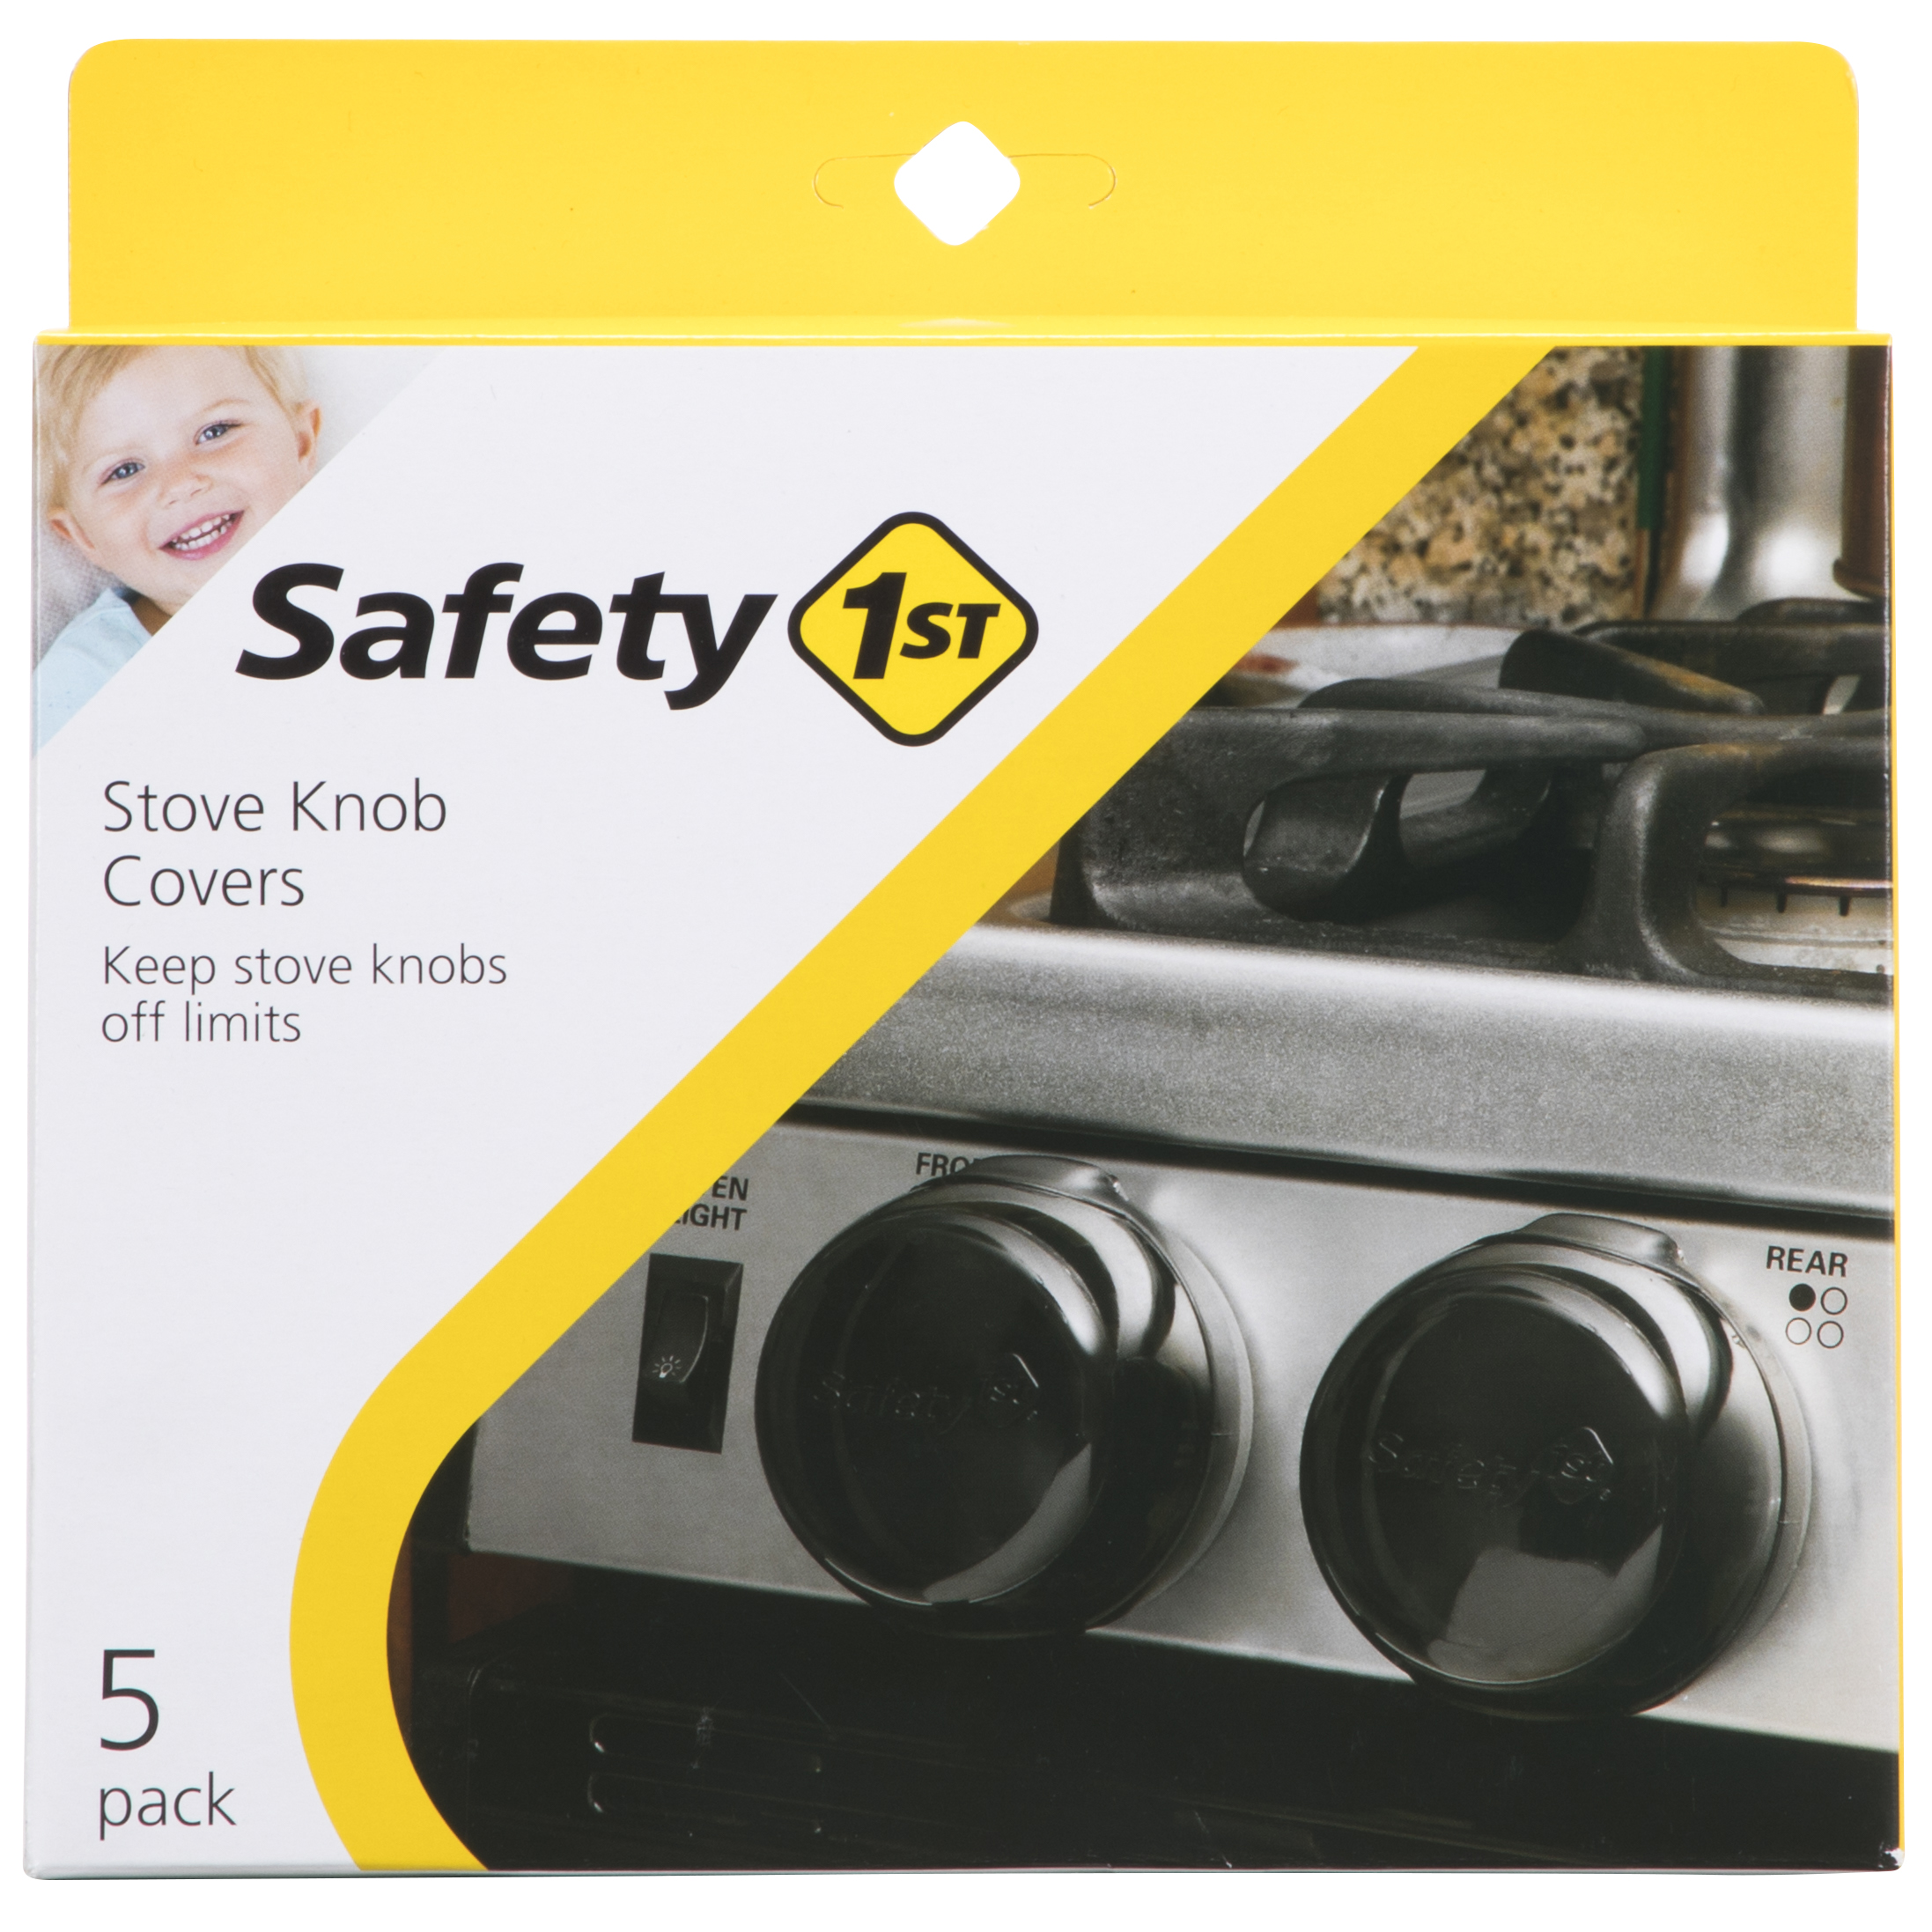 Safety 1st Universal Design Stove Knob Covers, Black - image 1 of 4